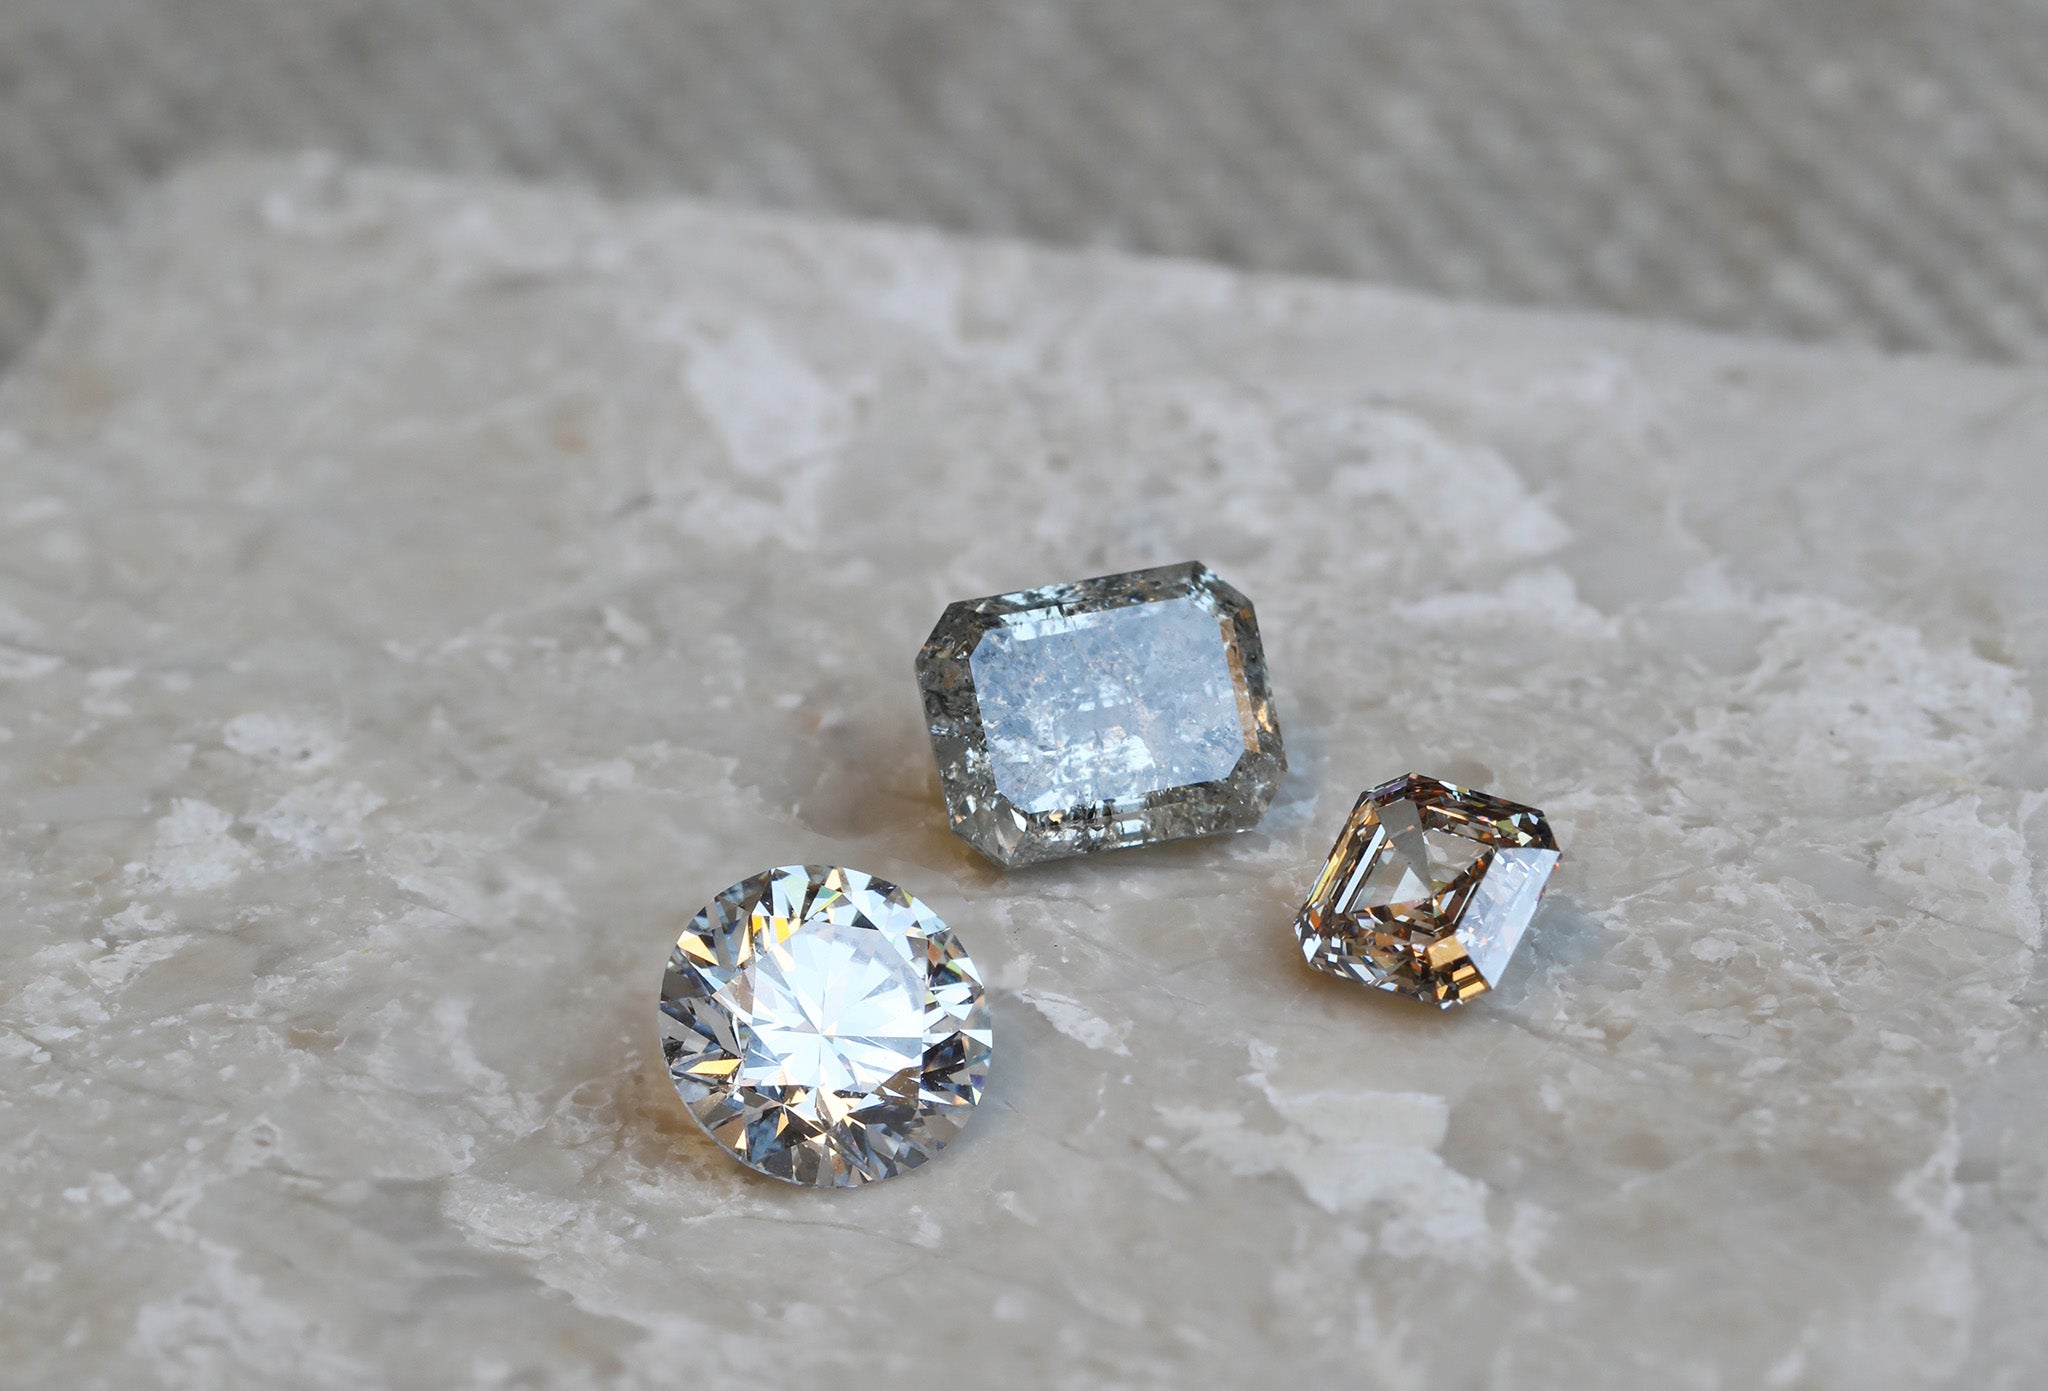 A Round Brilliant Cut diamond, Emerald Cut grey diamond and Asscher Cut Champagne diamond waiting to be turned into custom diamond engagement rings.